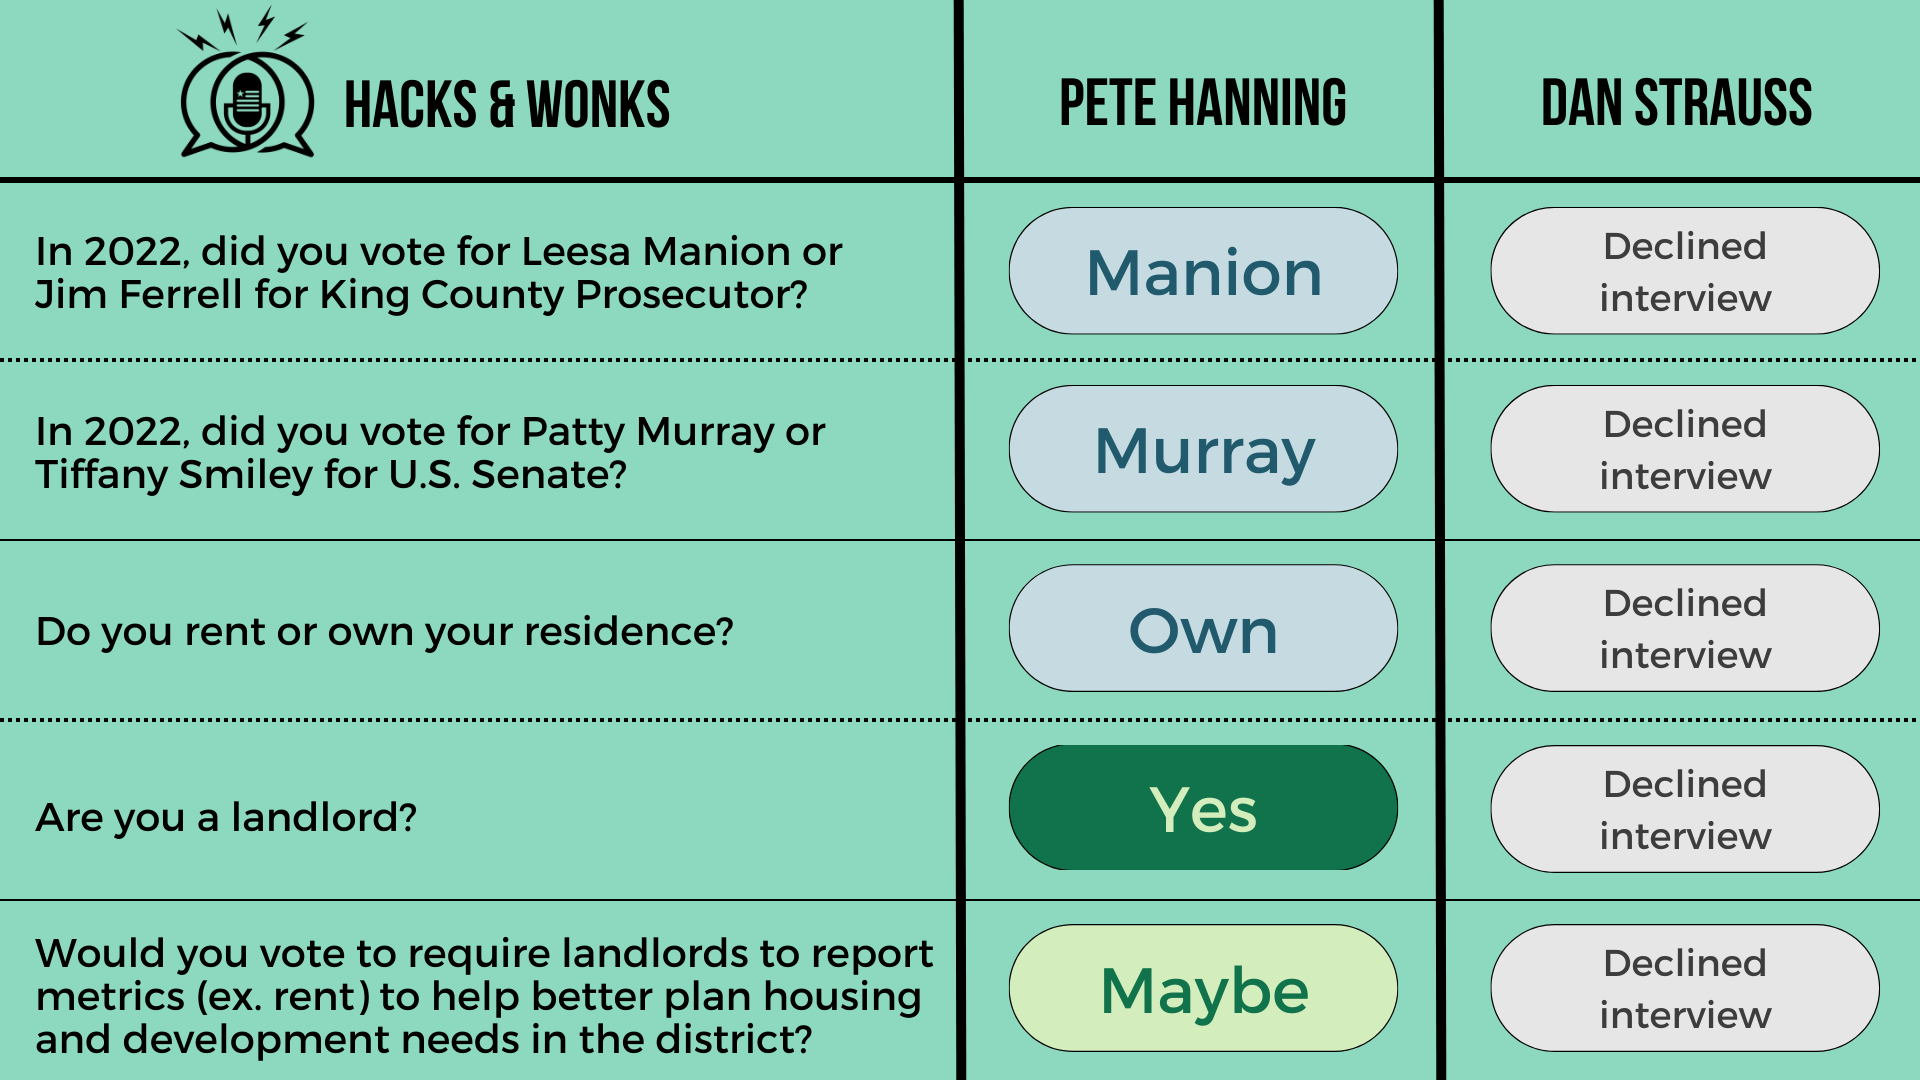 Q: In 2022, did you vote for Leesa Manion or Jim Ferrell for King County Prosecutor? Pete Hanning: Manion, Dan Strauss: Declined interview  Q: In 2022, did you vote for Patty Murray or Tiffany Smiley for U.S. Senate? Pete Hanning: Murray, Dan Strauss